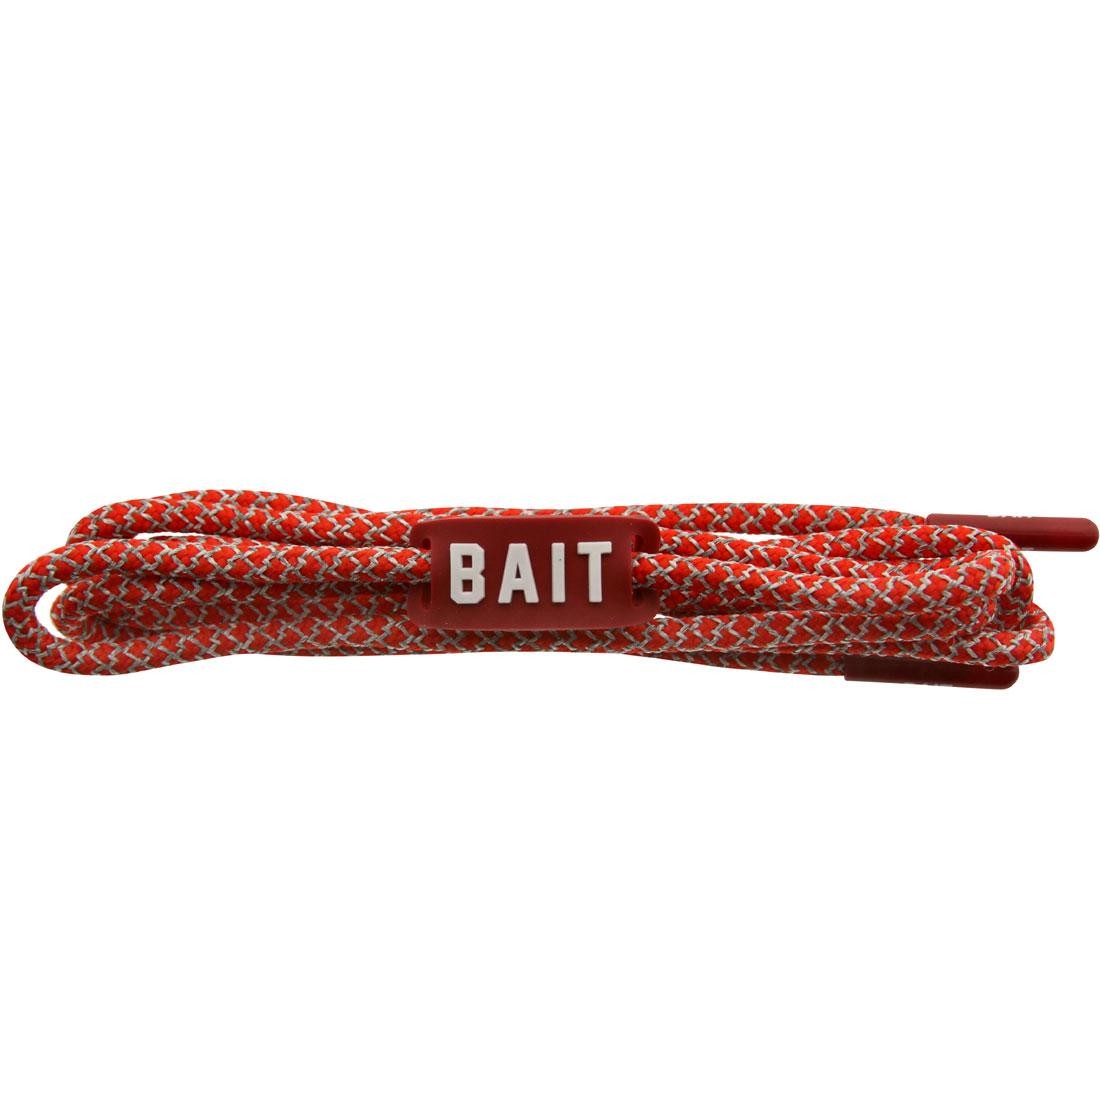 BAIT Deluxe 3M Rope Shoelaces (red / 3M / red)